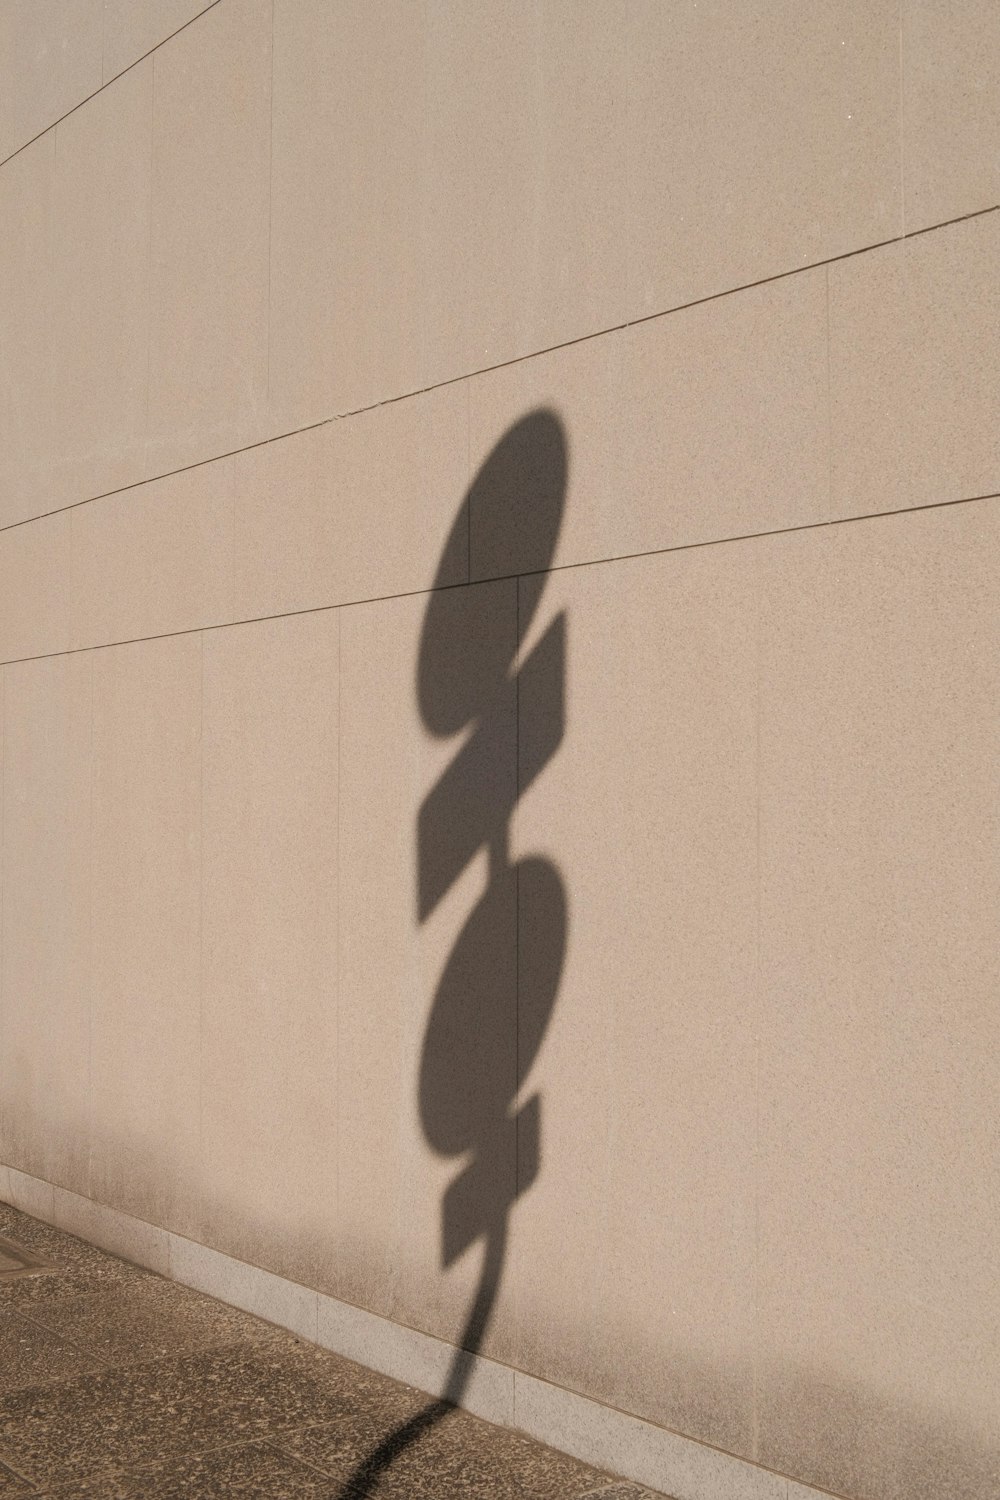 a shadow of a street sign on a wall